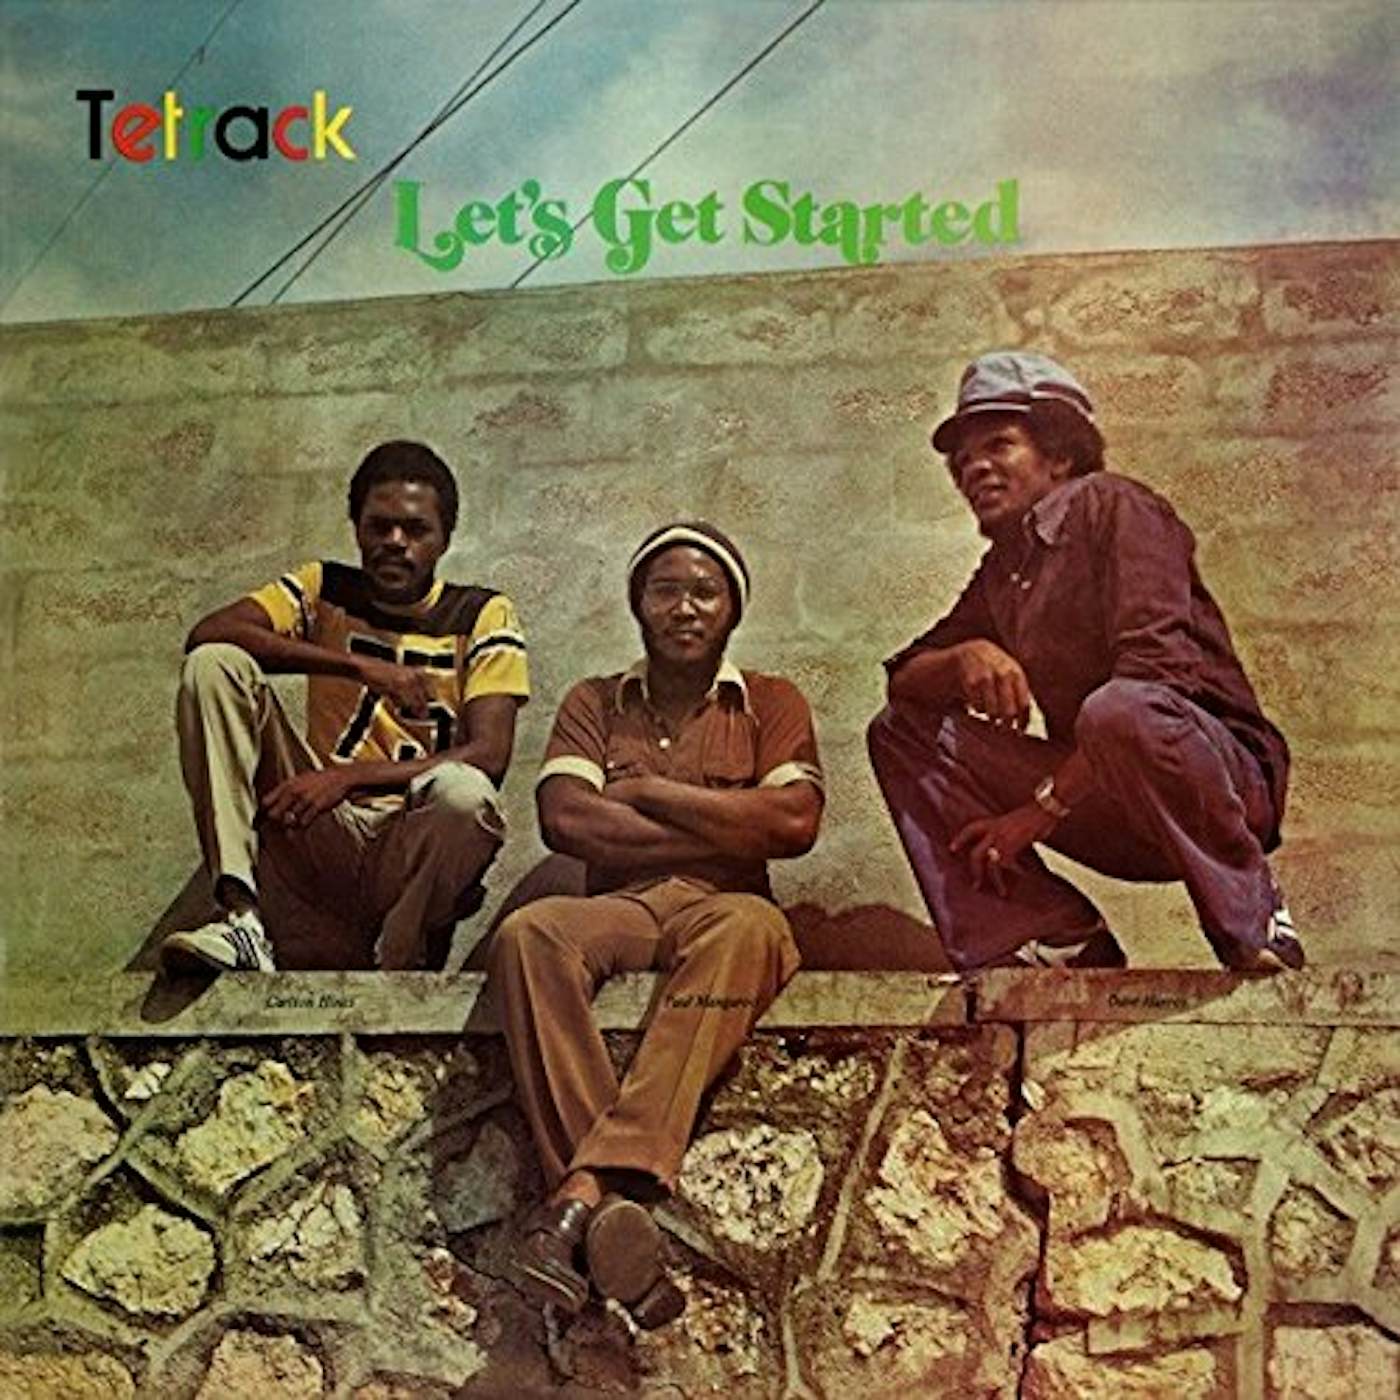 Tetrack LET'S GET STARTED Vinyl Record